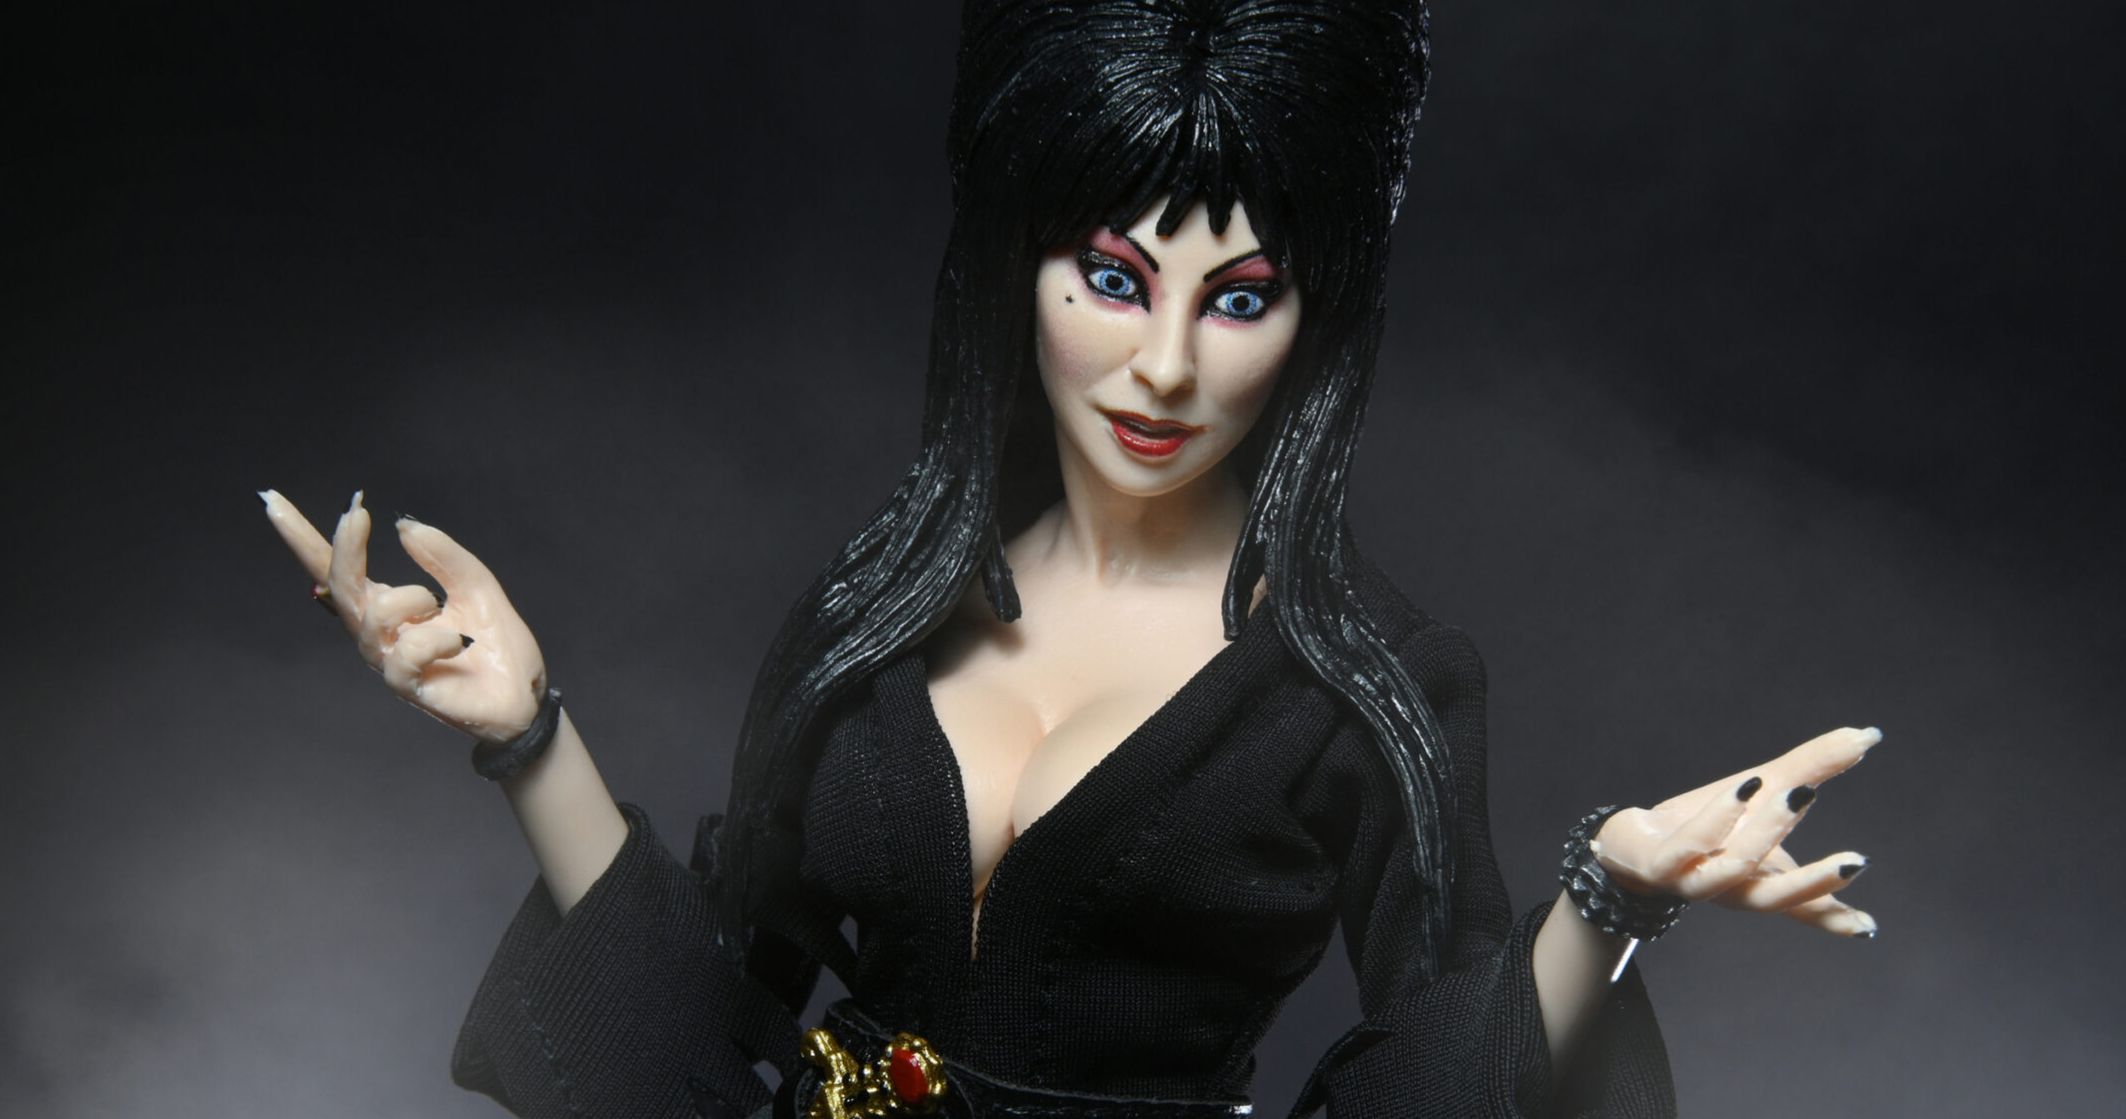 Elvira Gets Amazing Action Figure from NECA in Honor of 40th Anniversary